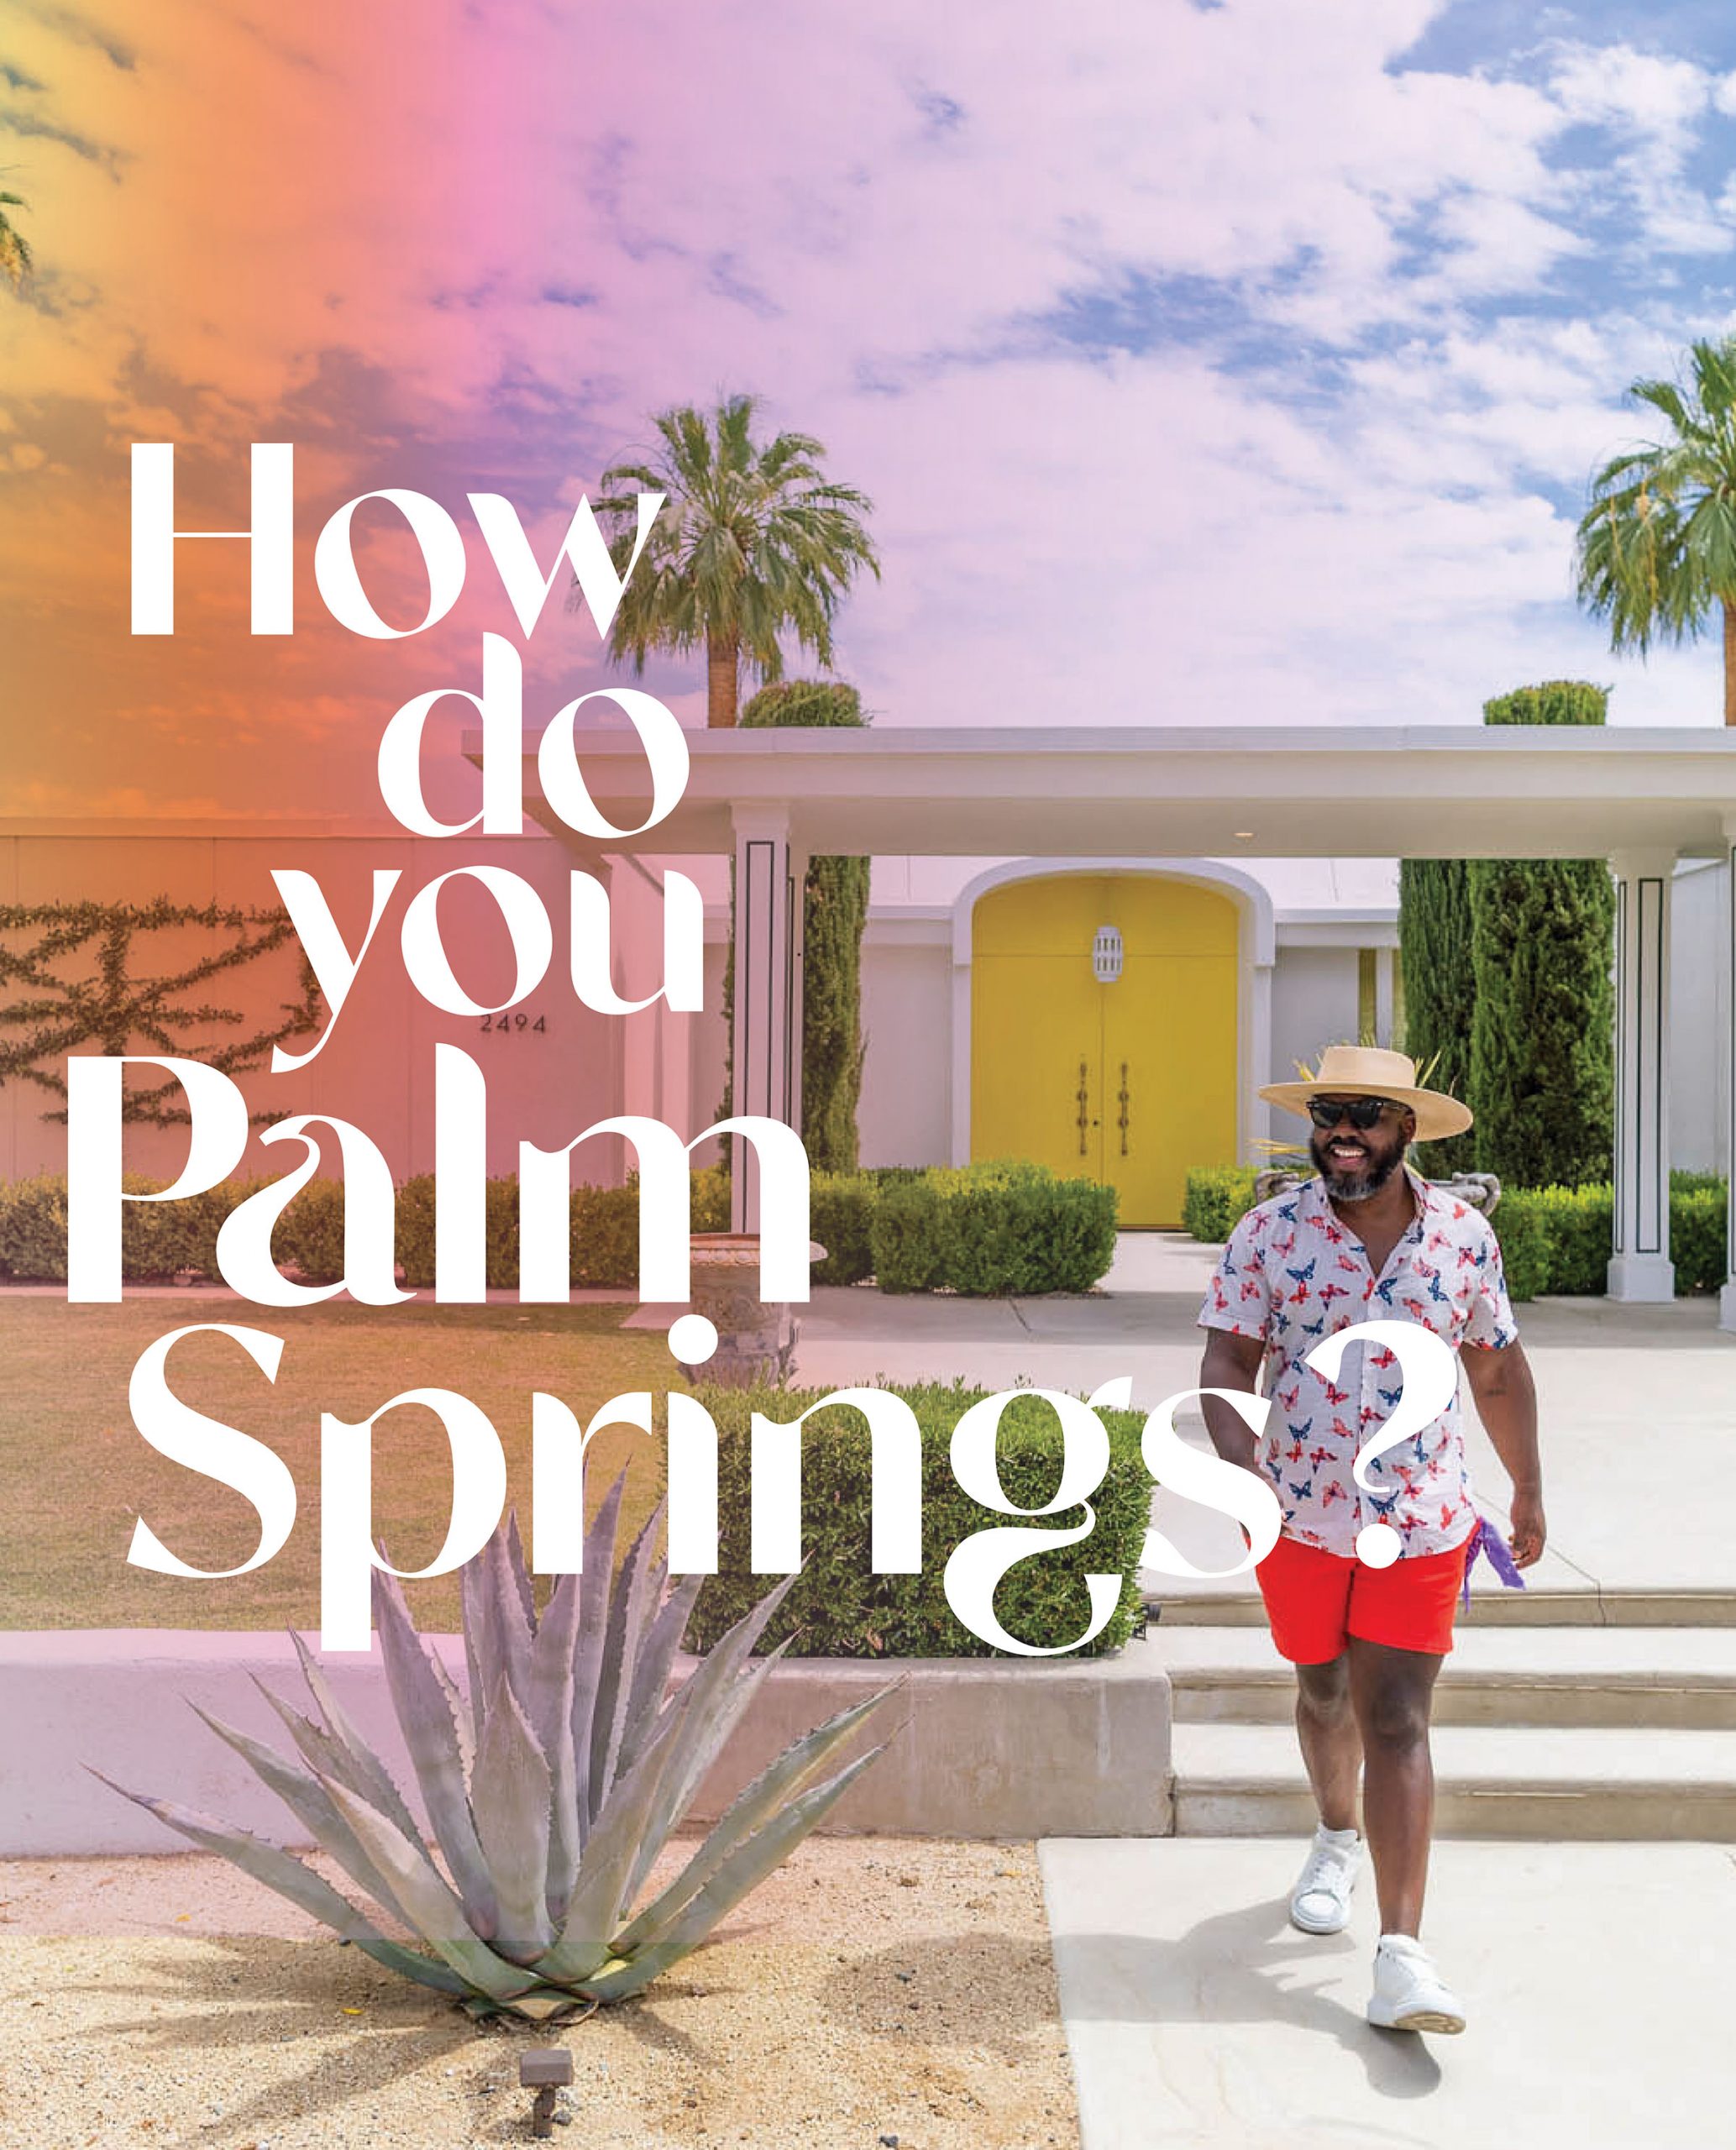 Visit Palm Springs Launches 'How do you Palm Springs?' Campaign